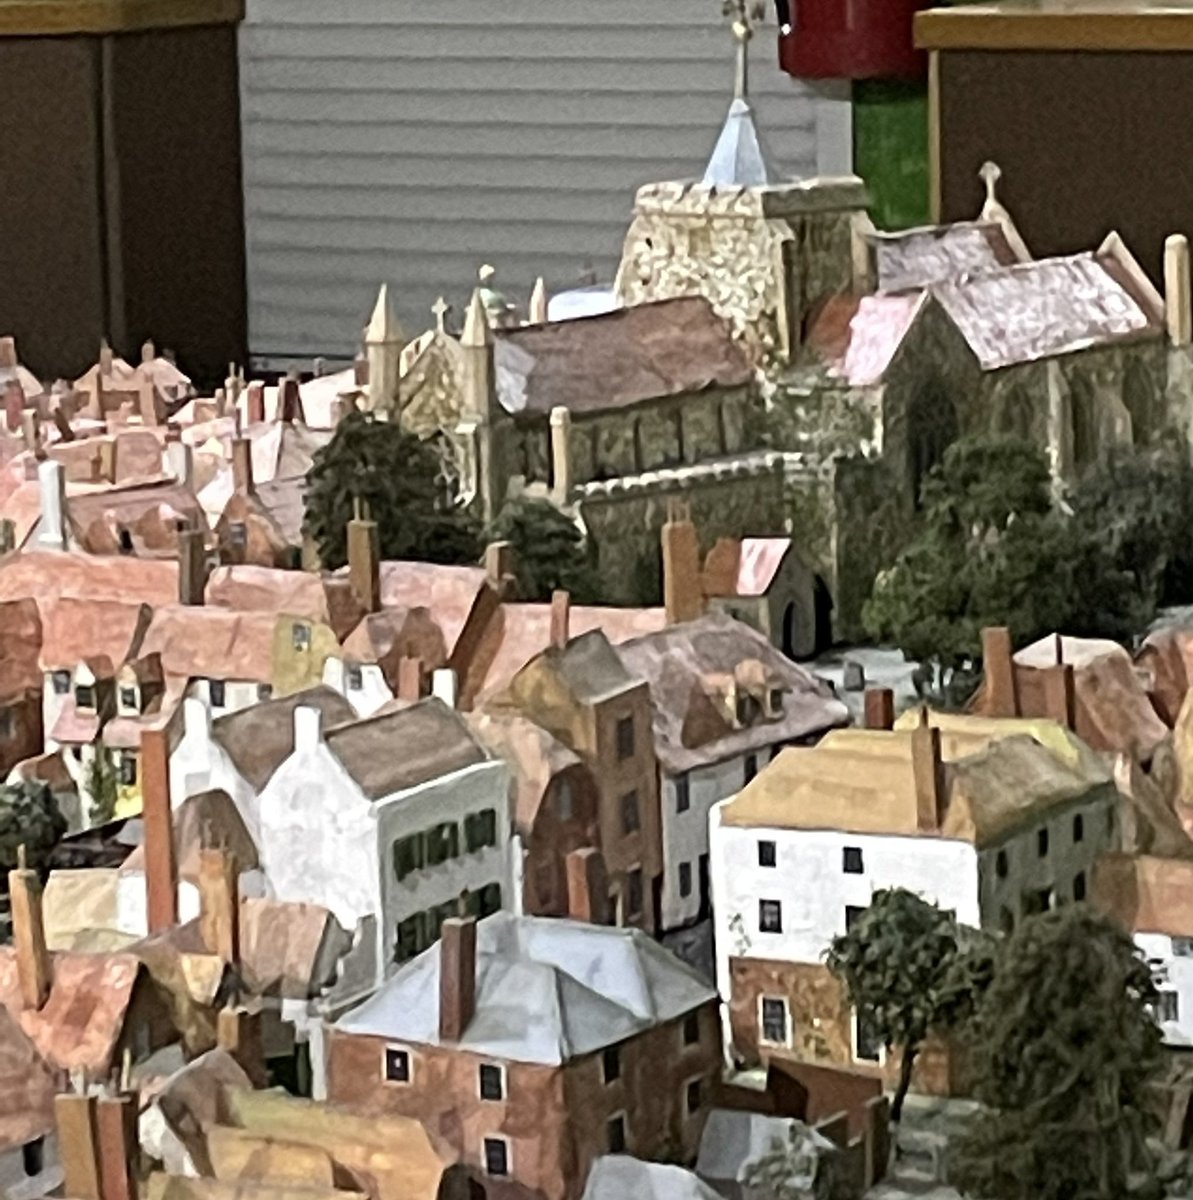 Reopening at last this Thursday. Come and see what we’ve been up to with the Rye Town Model #ryeheritage @Visit1066 @MrTimDunn @aryegoodtime @ryesussex